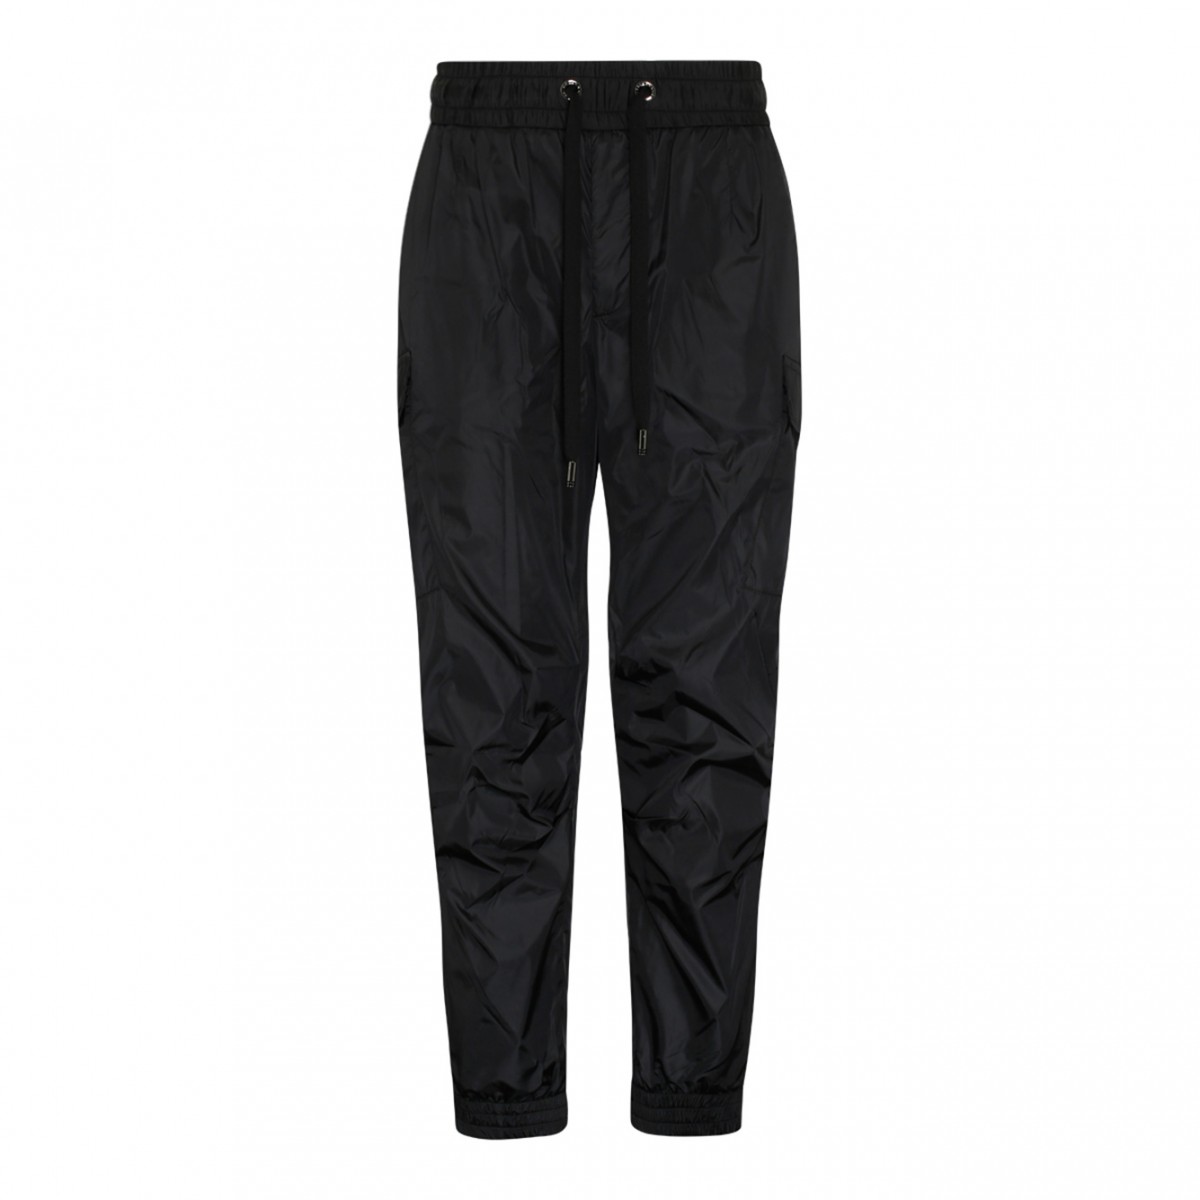 Dolce & Gabbana Black Tapered Cargo Track Pants.| COLOGNESE 1882